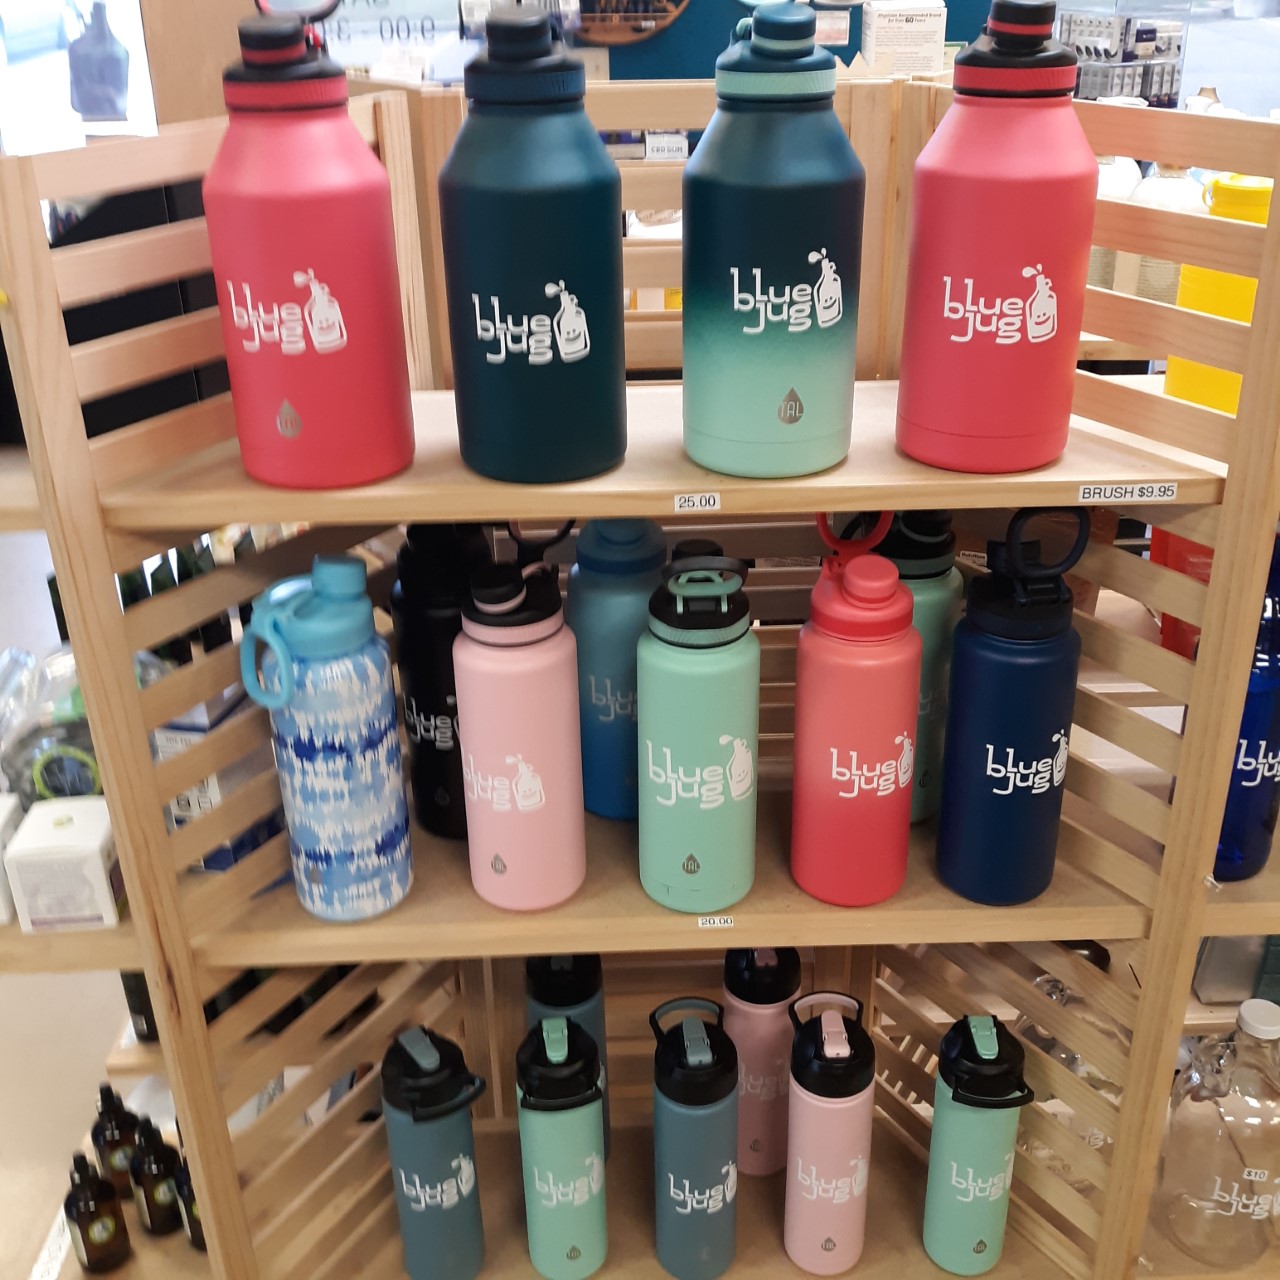 Assorted Blue Jug Waco drinking bottles displayed on a stand